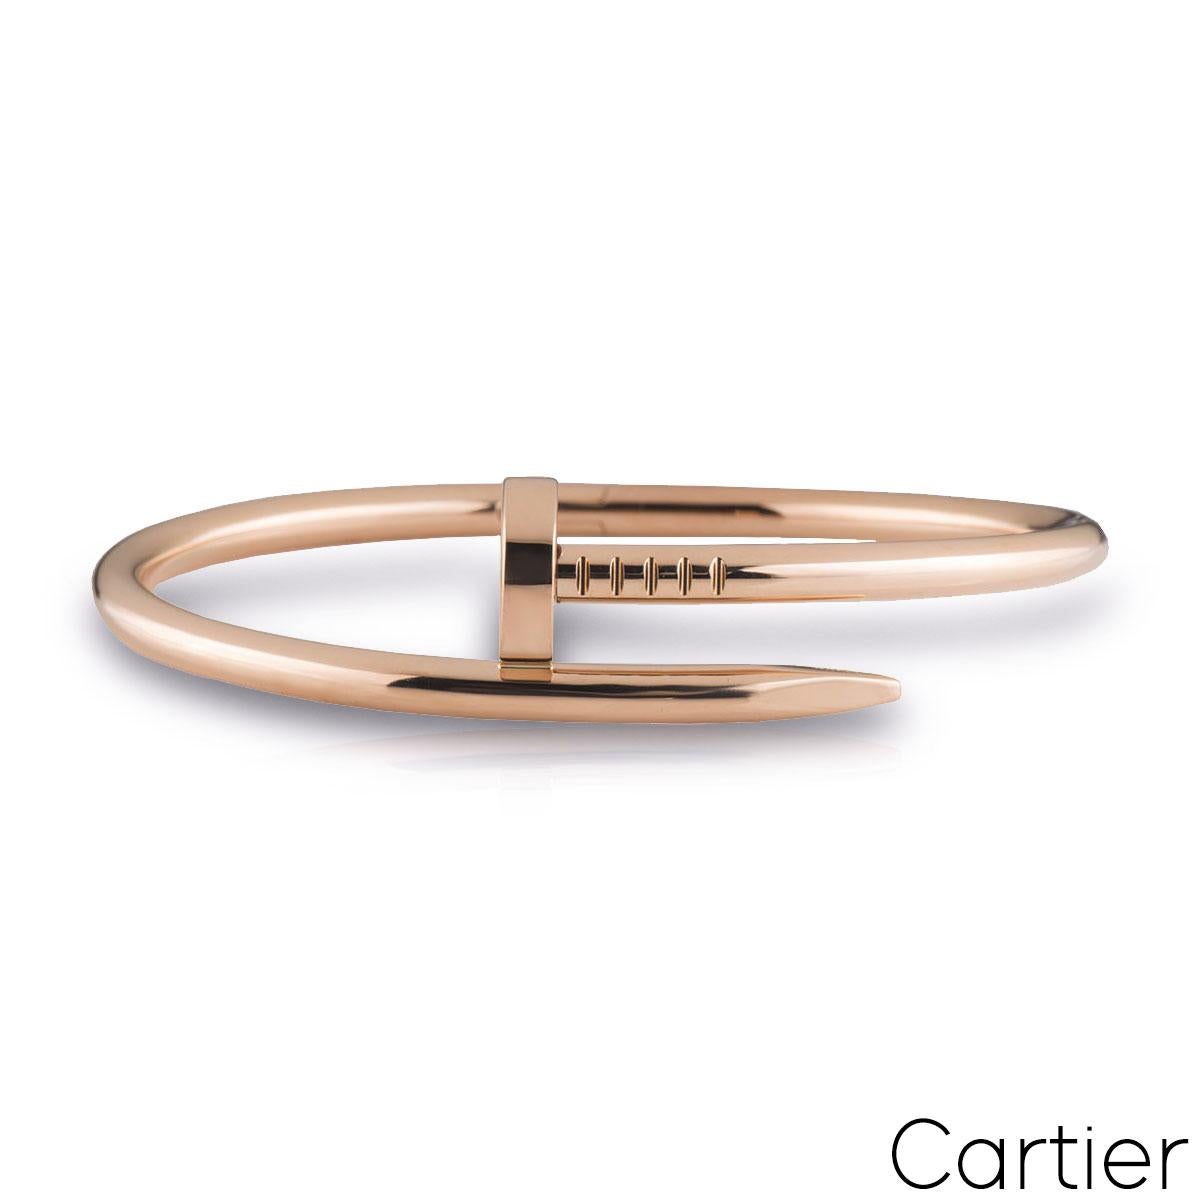 An iconic 18k rose gold Cartier bracelet from the Juste Un Clou collection. The bracelet is wrapped around with a nail head at one end and nail end at the other. The bracelet is size 17 with the old style clasp fitting and has a gross weight of 32.9